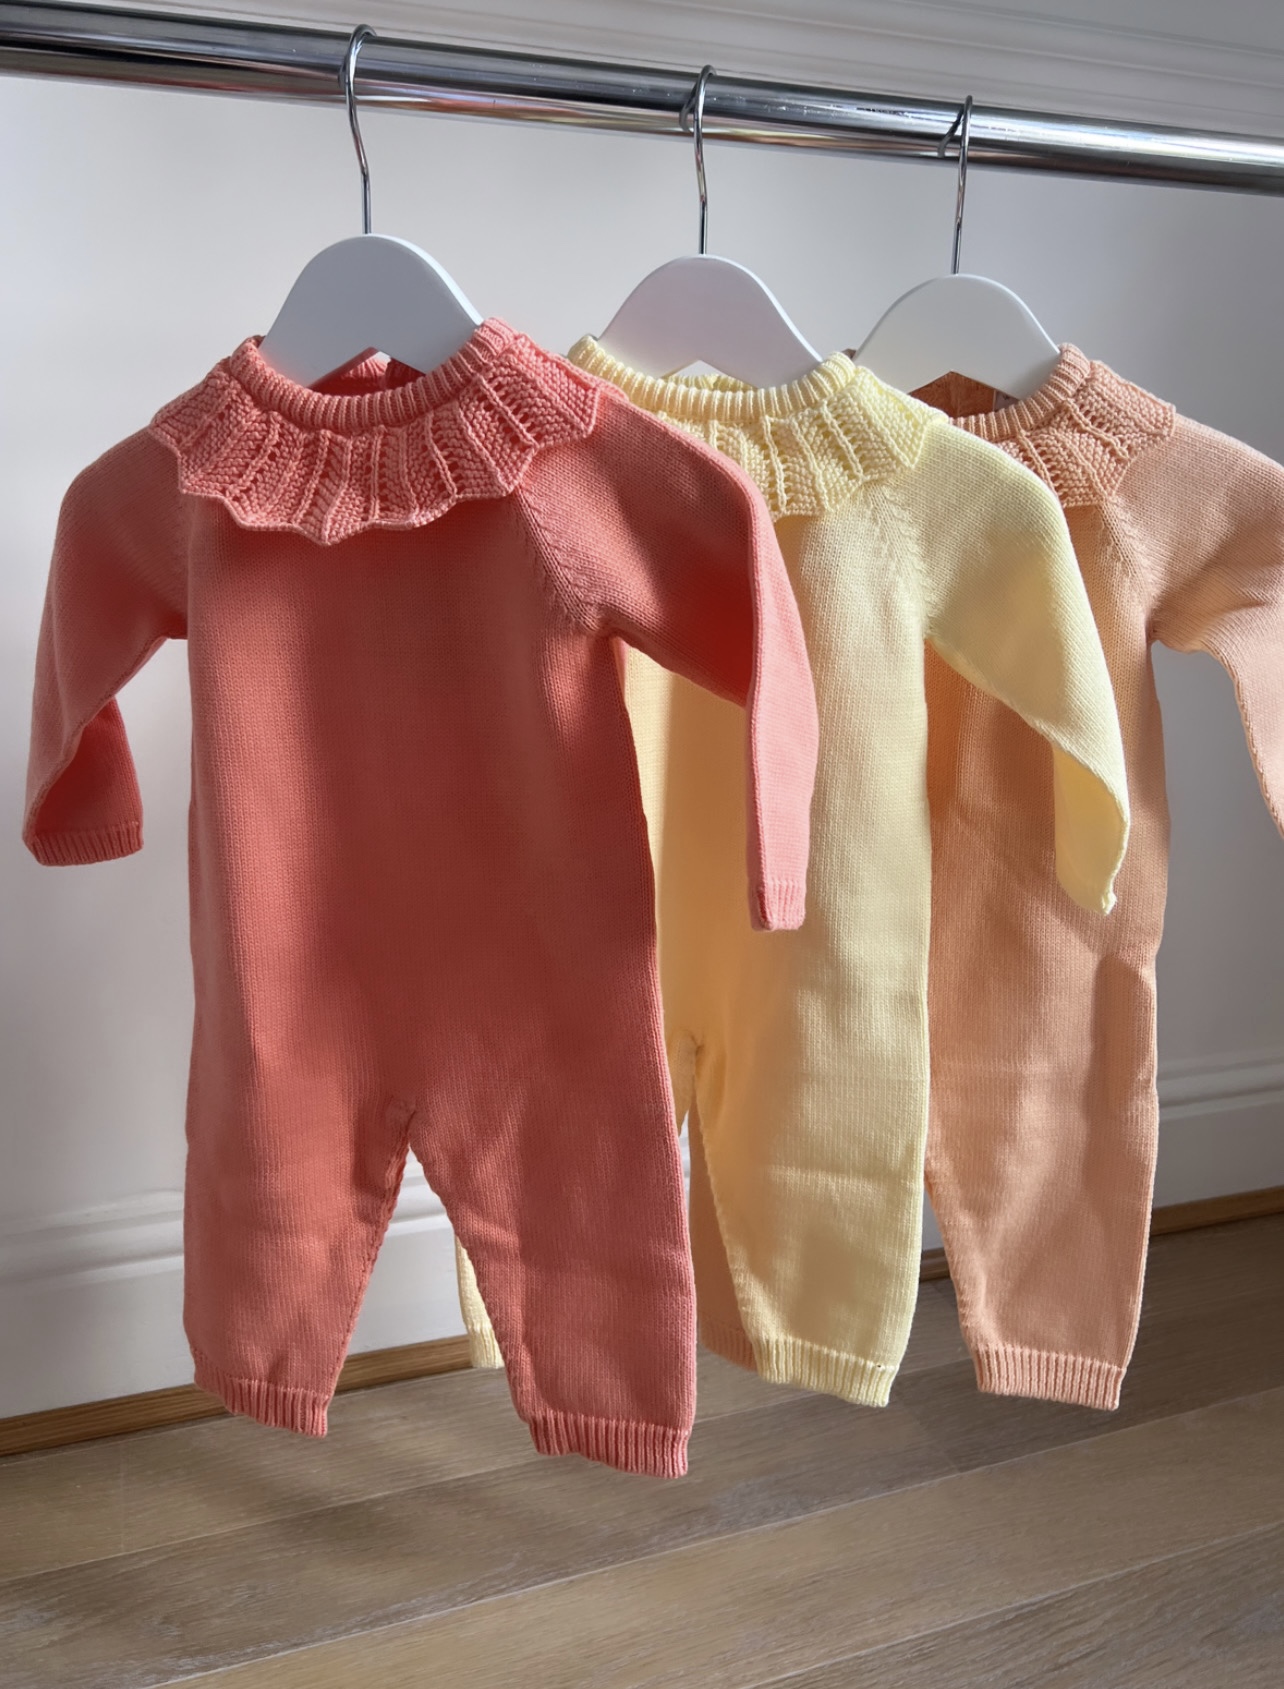 Wedoble Girls SS21 Footless Babygrows - 3X colours